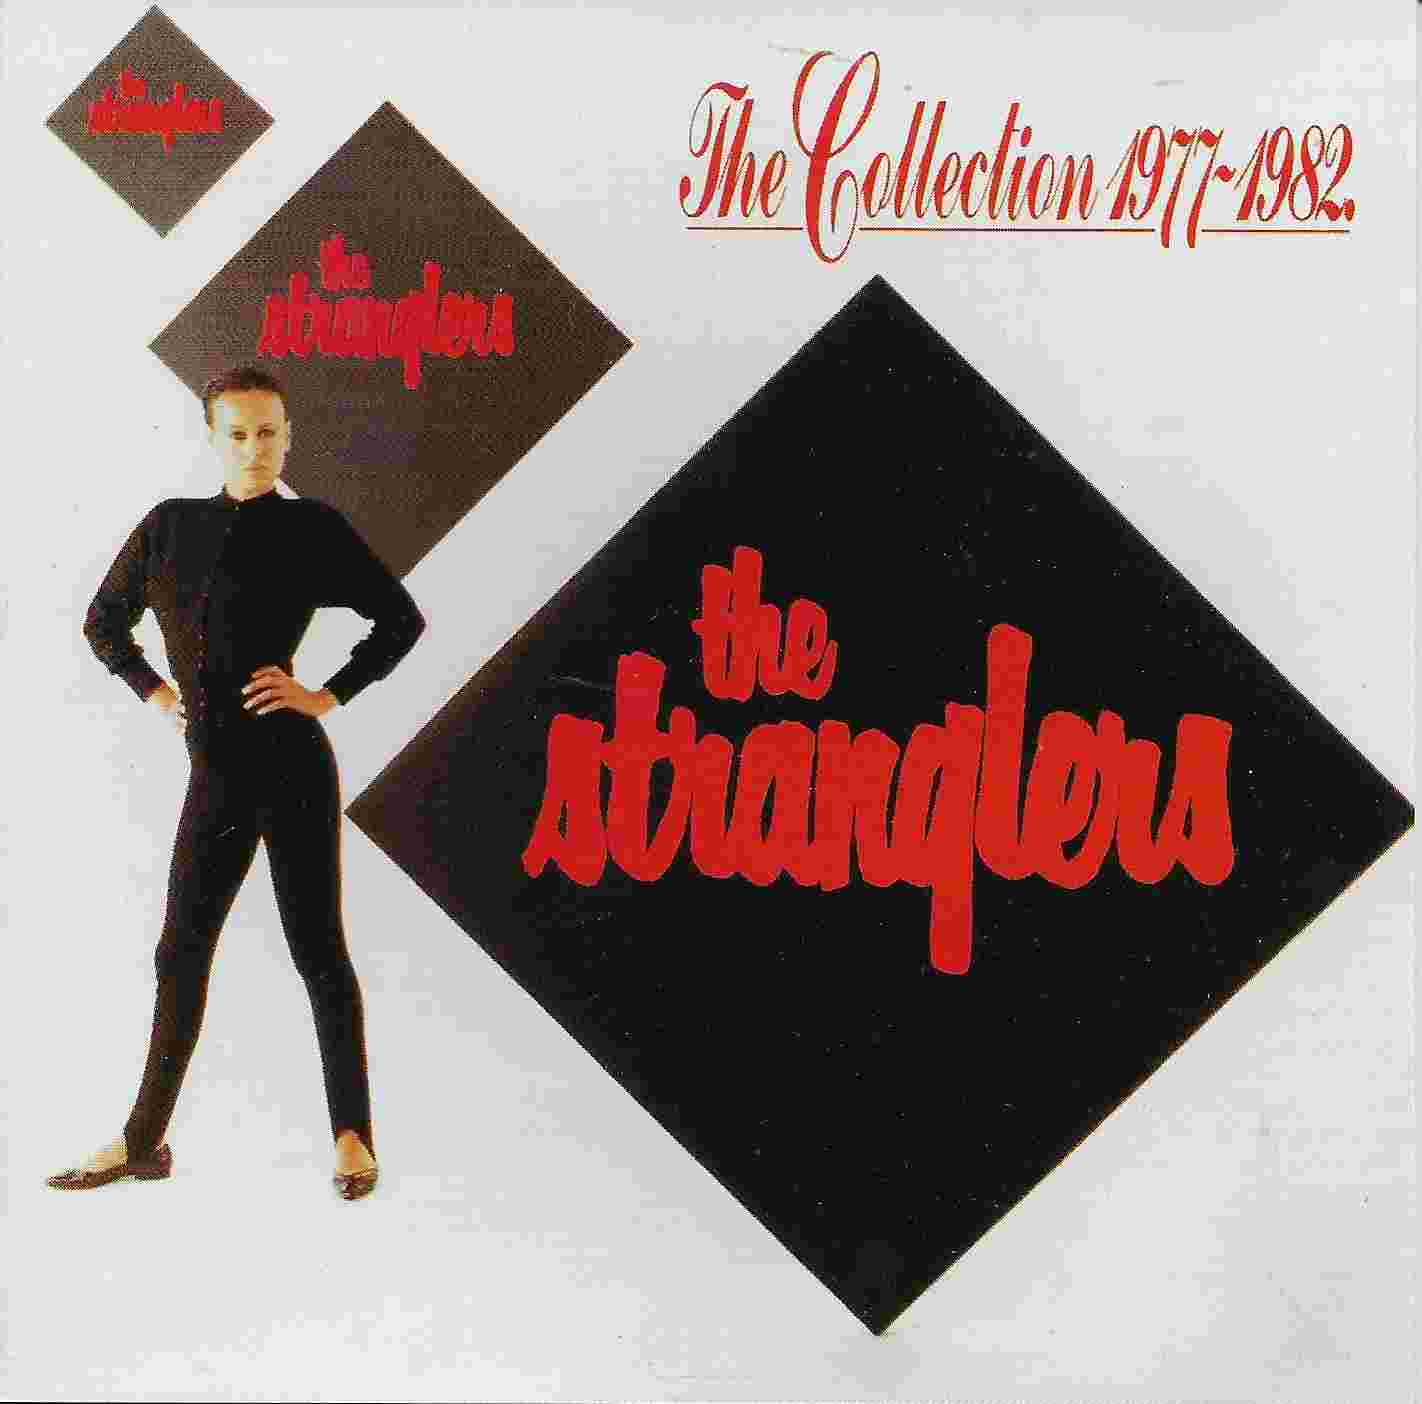 Picture of CDP 746066-2 The collection 1977 - 1982 by artist The Stranglers from The Stranglers